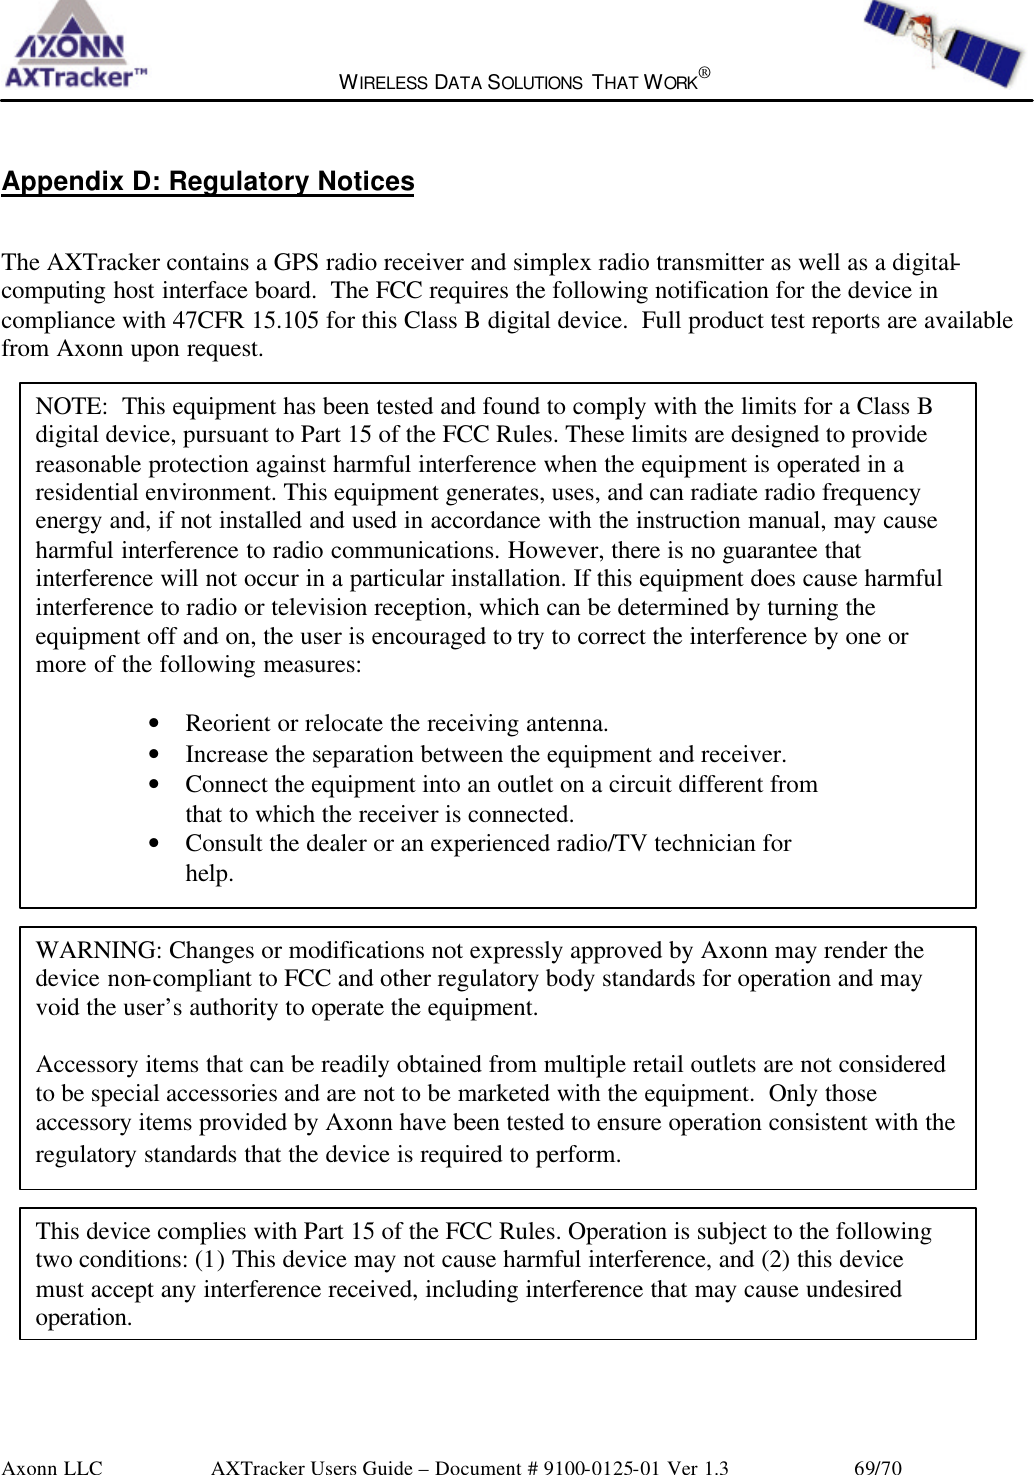  WIRELESS DATA SOLUTIONS THAT WORK®   Axonn LLC        AXTracker Users Guide – Document # 9100-0125-01 Ver 1.3                 69/70 Appendix D: Regulatory Notices The AXTracker contains a GPS radio receiver and simplex radio transmitter as well as a digital-computing host interface board.  The FCC requires the following notification for the device in compliance with 47CFR 15.105 for this Class B digital device.  Full product test reports are available from Axonn upon request.                                    NOTE:  This equipment has been tested and found to comply with the limits for a Class B digital device, pursuant to Part 15 of the FCC Rules. These limits are designed to provide reasonable protection against harmful interference when the equipment is operated in a residential environment. This equipment generates, uses, and can radiate radio frequency energy and, if not installed and used in accordance with the instruction manual, may cause harmful interference to radio communications. However, there is no guarantee that interference will not occur in a particular installation. If this equipment does cause harmful interference to radio or television reception, which can be determined by turning the equipment off and on, the user is encouraged to try to correct the interference by one or more of the following measures:  • Reorient or relocate the receiving antenna. • Increase the separation between the equipment and receiver. • Connect the equipment into an outlet on a circuit different from that to which the receiver is connected. • Consult the dealer or an experienced radio/TV technician for help.  WARNING: Changes or modifications not expressly approved by Axonn may render the device non-compliant to FCC and other regulatory body standards for operation and may void the user’s authority to operate the equipment.  Accessory items that can be readily obtained from multiple retail outlets are not considered to be special accessories and are not to be marketed with the equipment.  Only those accessory items provided by Axonn have been tested to ensure operation consistent with the regulatory standards that the device is required to perform. This device complies with Part 15 of the FCC Rules. Operation is subject to the following two conditions: (1) This device may not cause harmful interference, and (2) this device must accept any interference received, including interference that may cause undesired operation. 